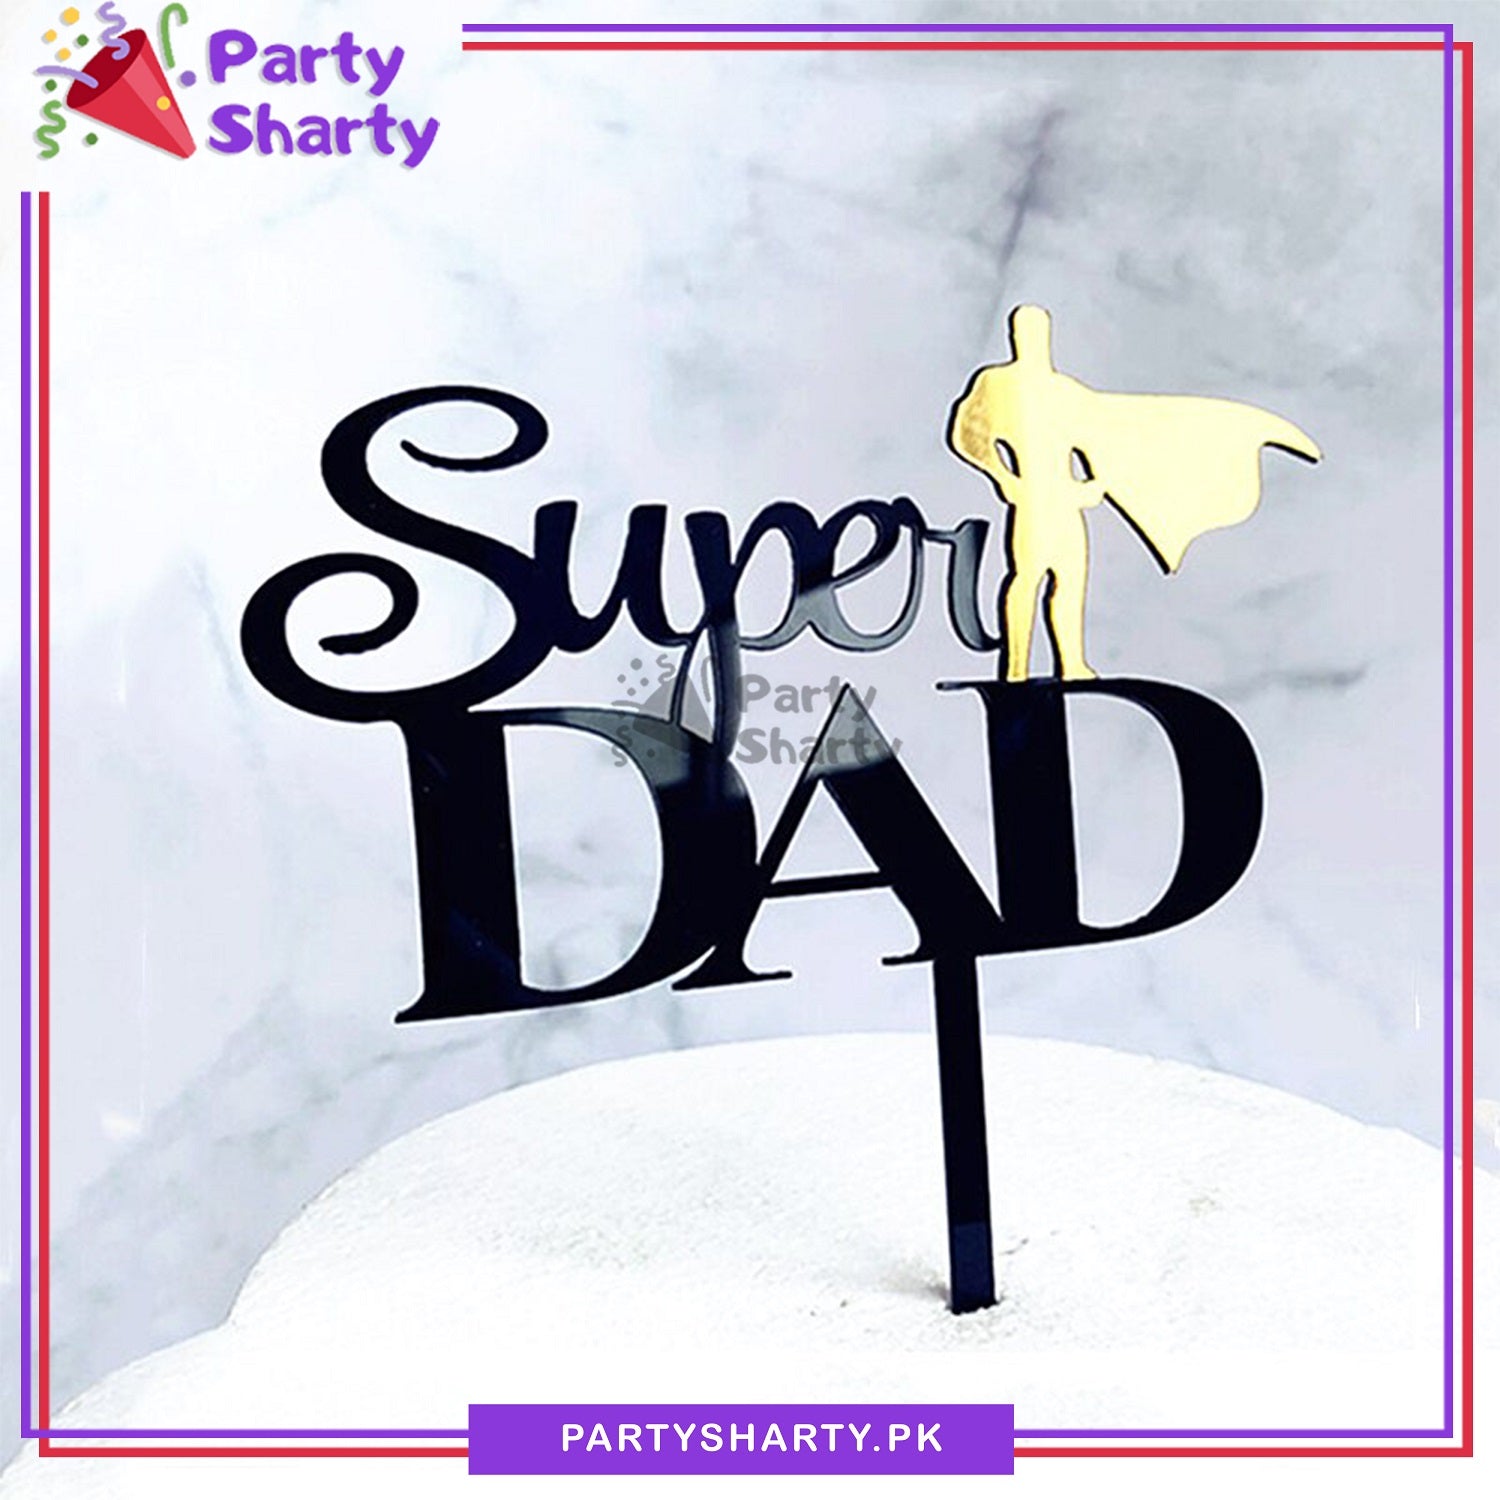 Black Super Dad Acrylic Cake Topper For Fathers Day or Birthday Party Celebration and Decoration